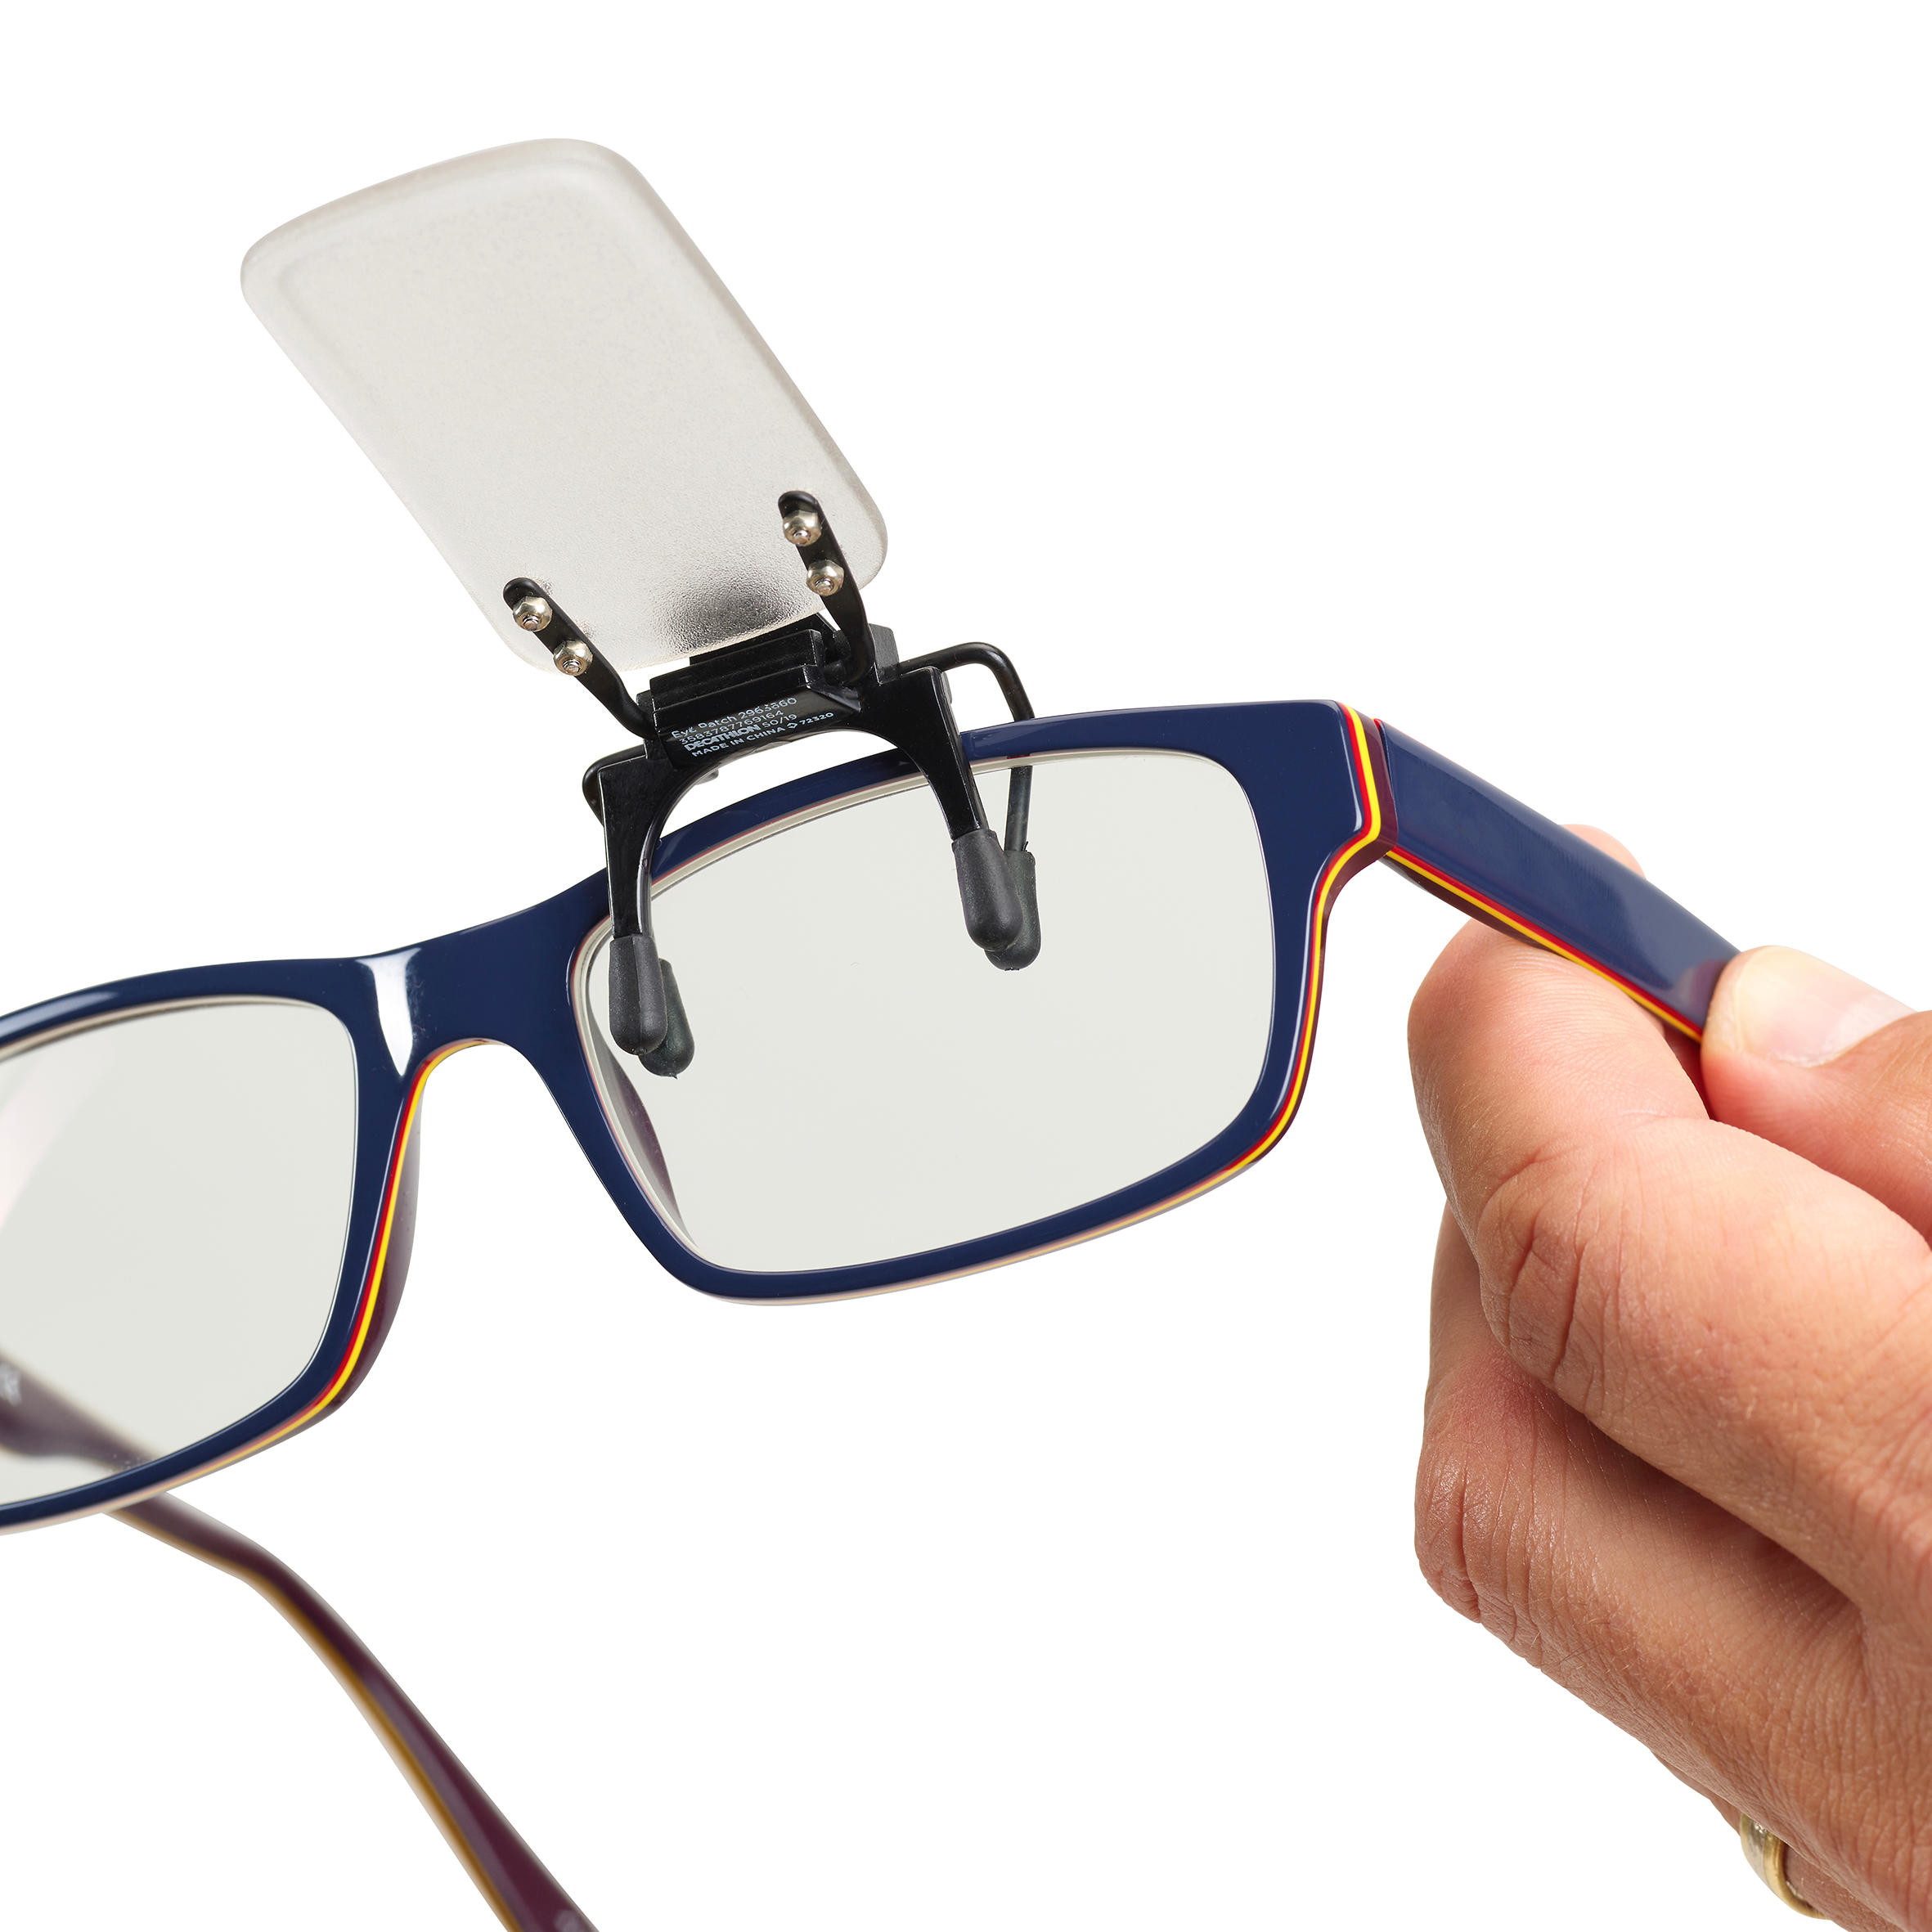 eye patch for glasses wearers